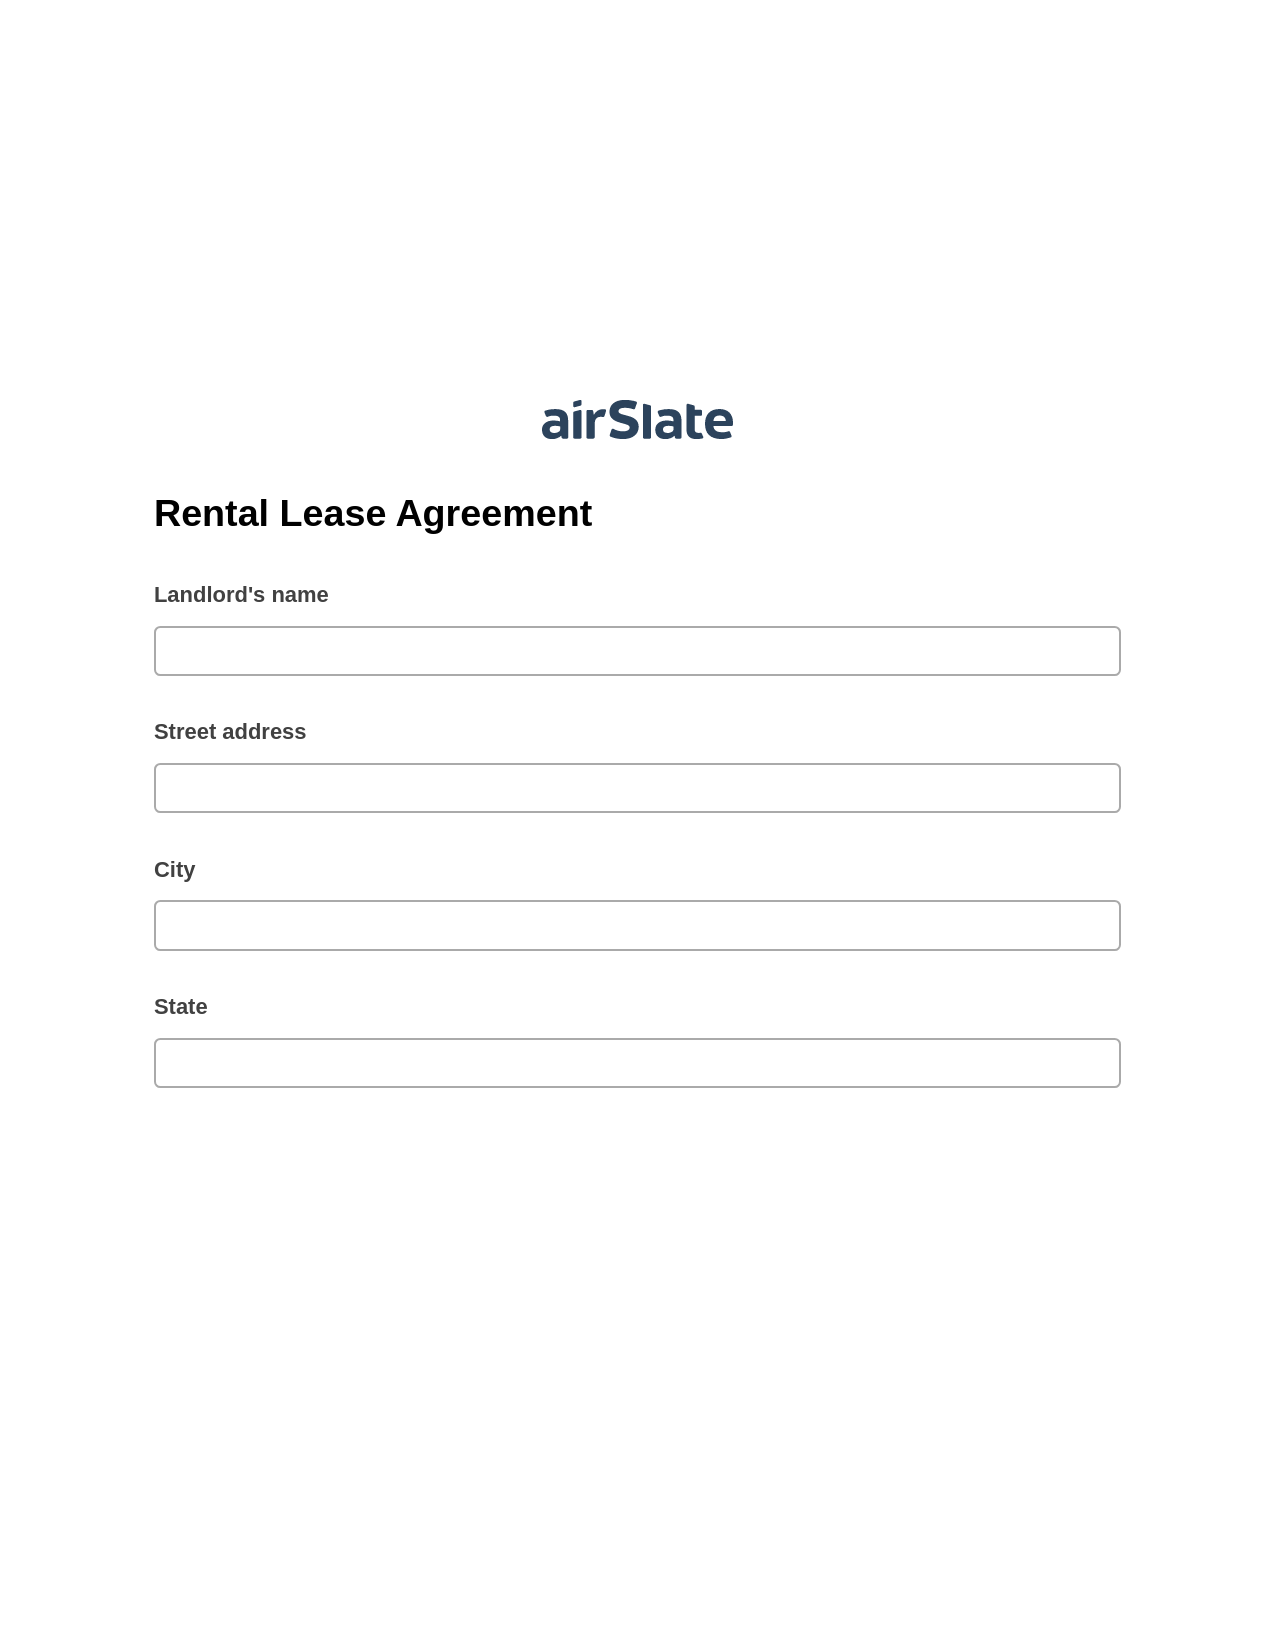 Rental Lease Agreement Pre-fill Dropdown from Airtable, Create slate addon, Webhook Postfinish Bot